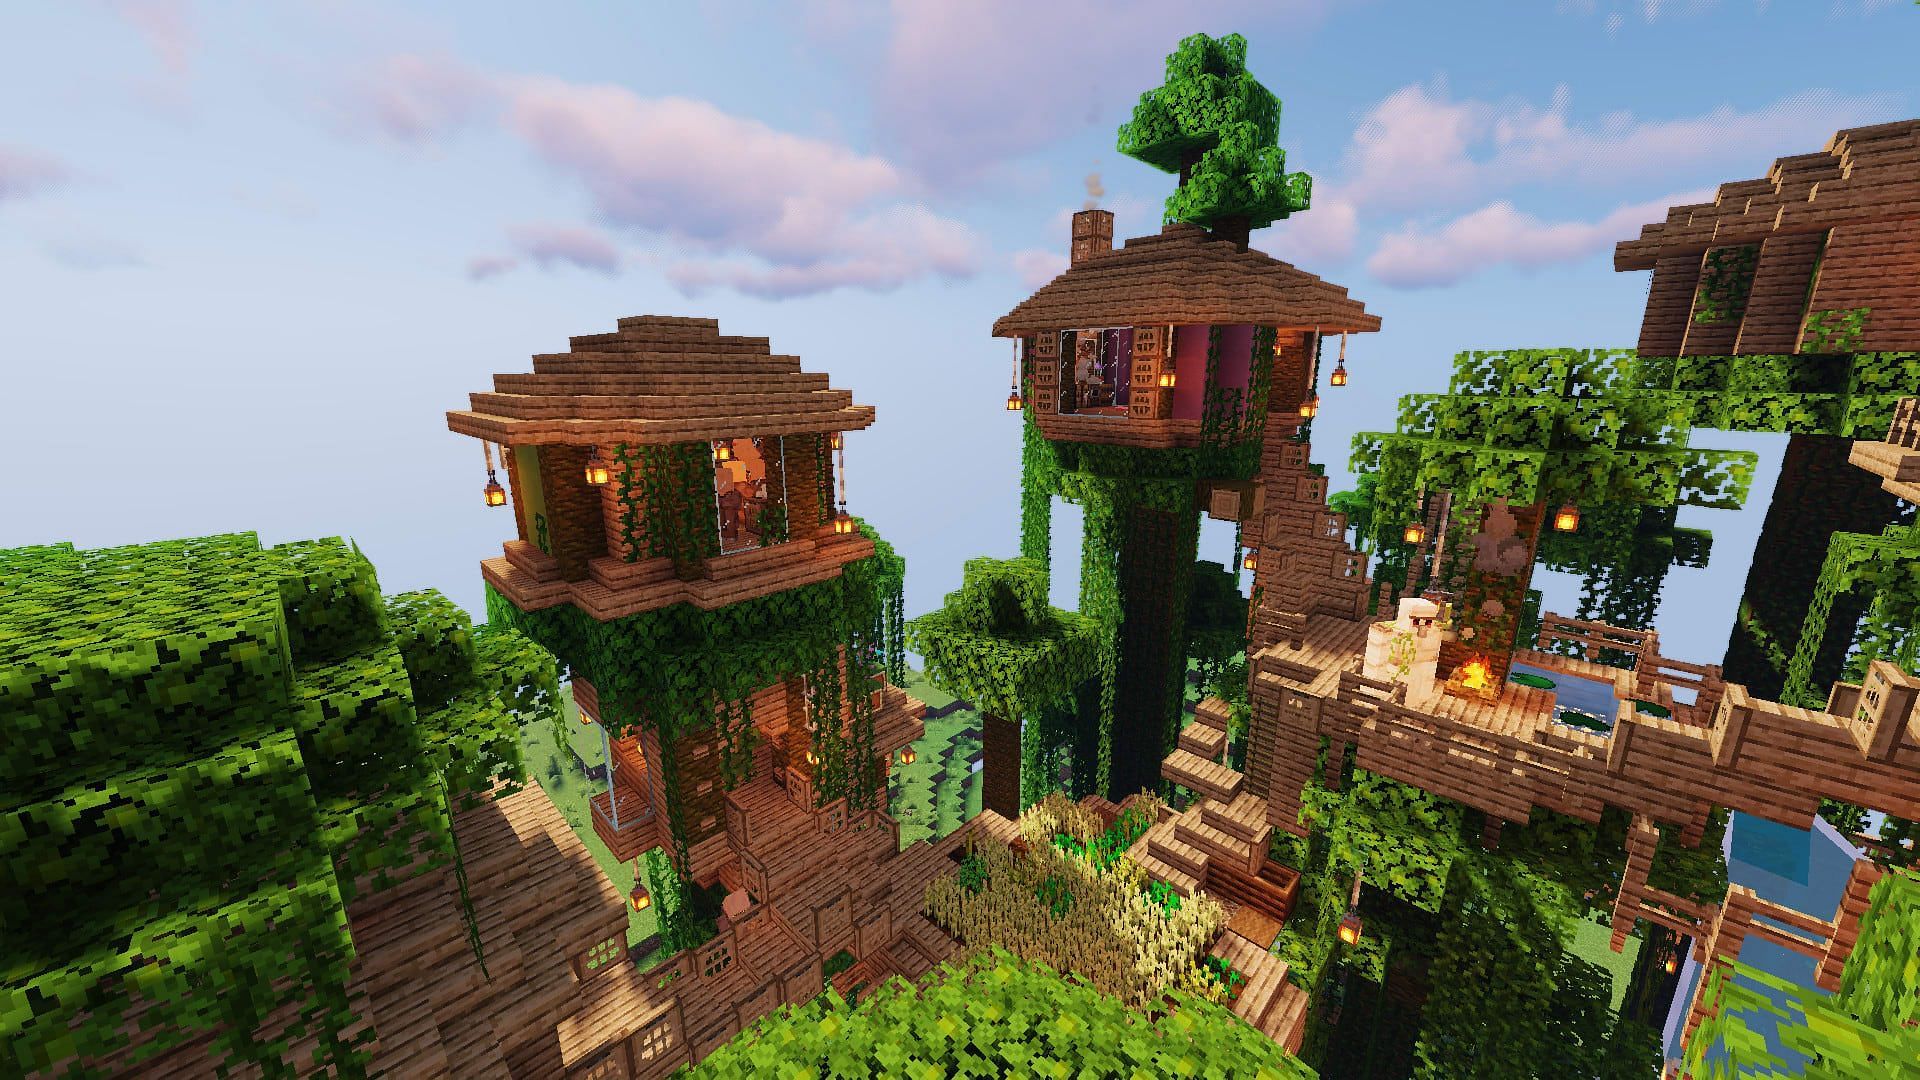 This modpack adds a variety of new structures to Minecraft (Image via Minecraft)